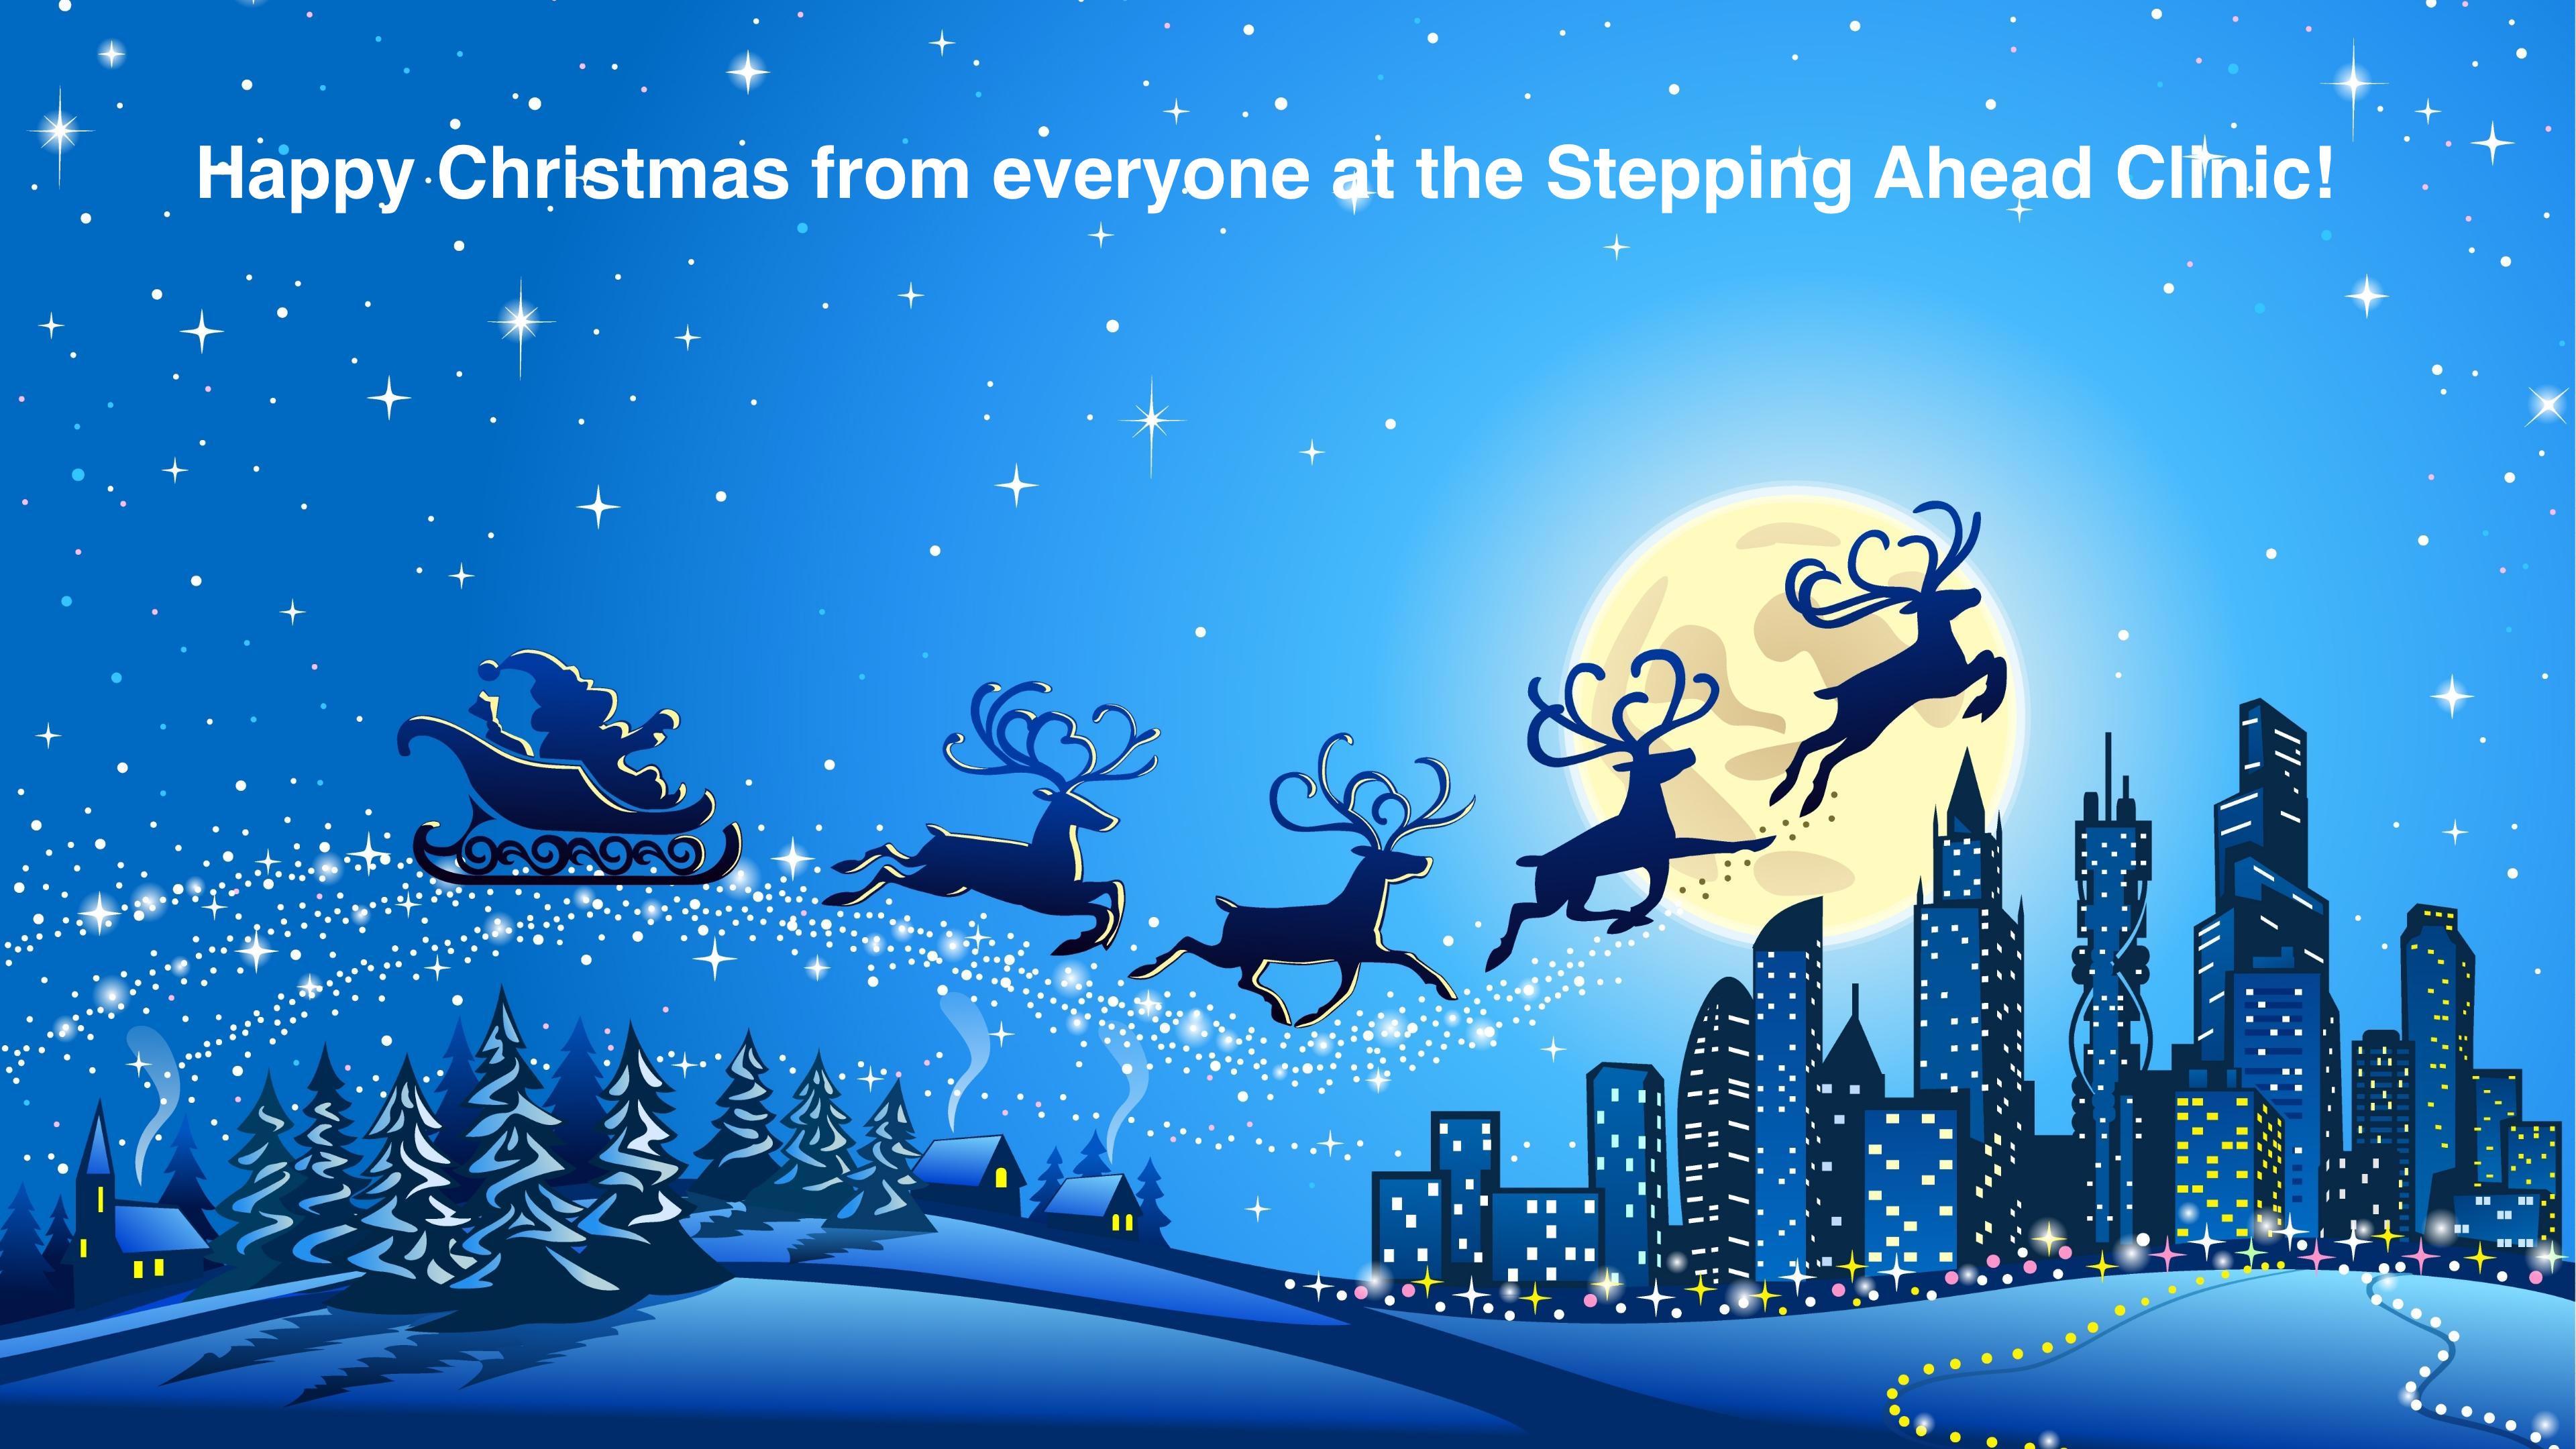 Merry Christmas And Happy New Year Dekstop HD Wallpaper. Stepping Ahead Clinic